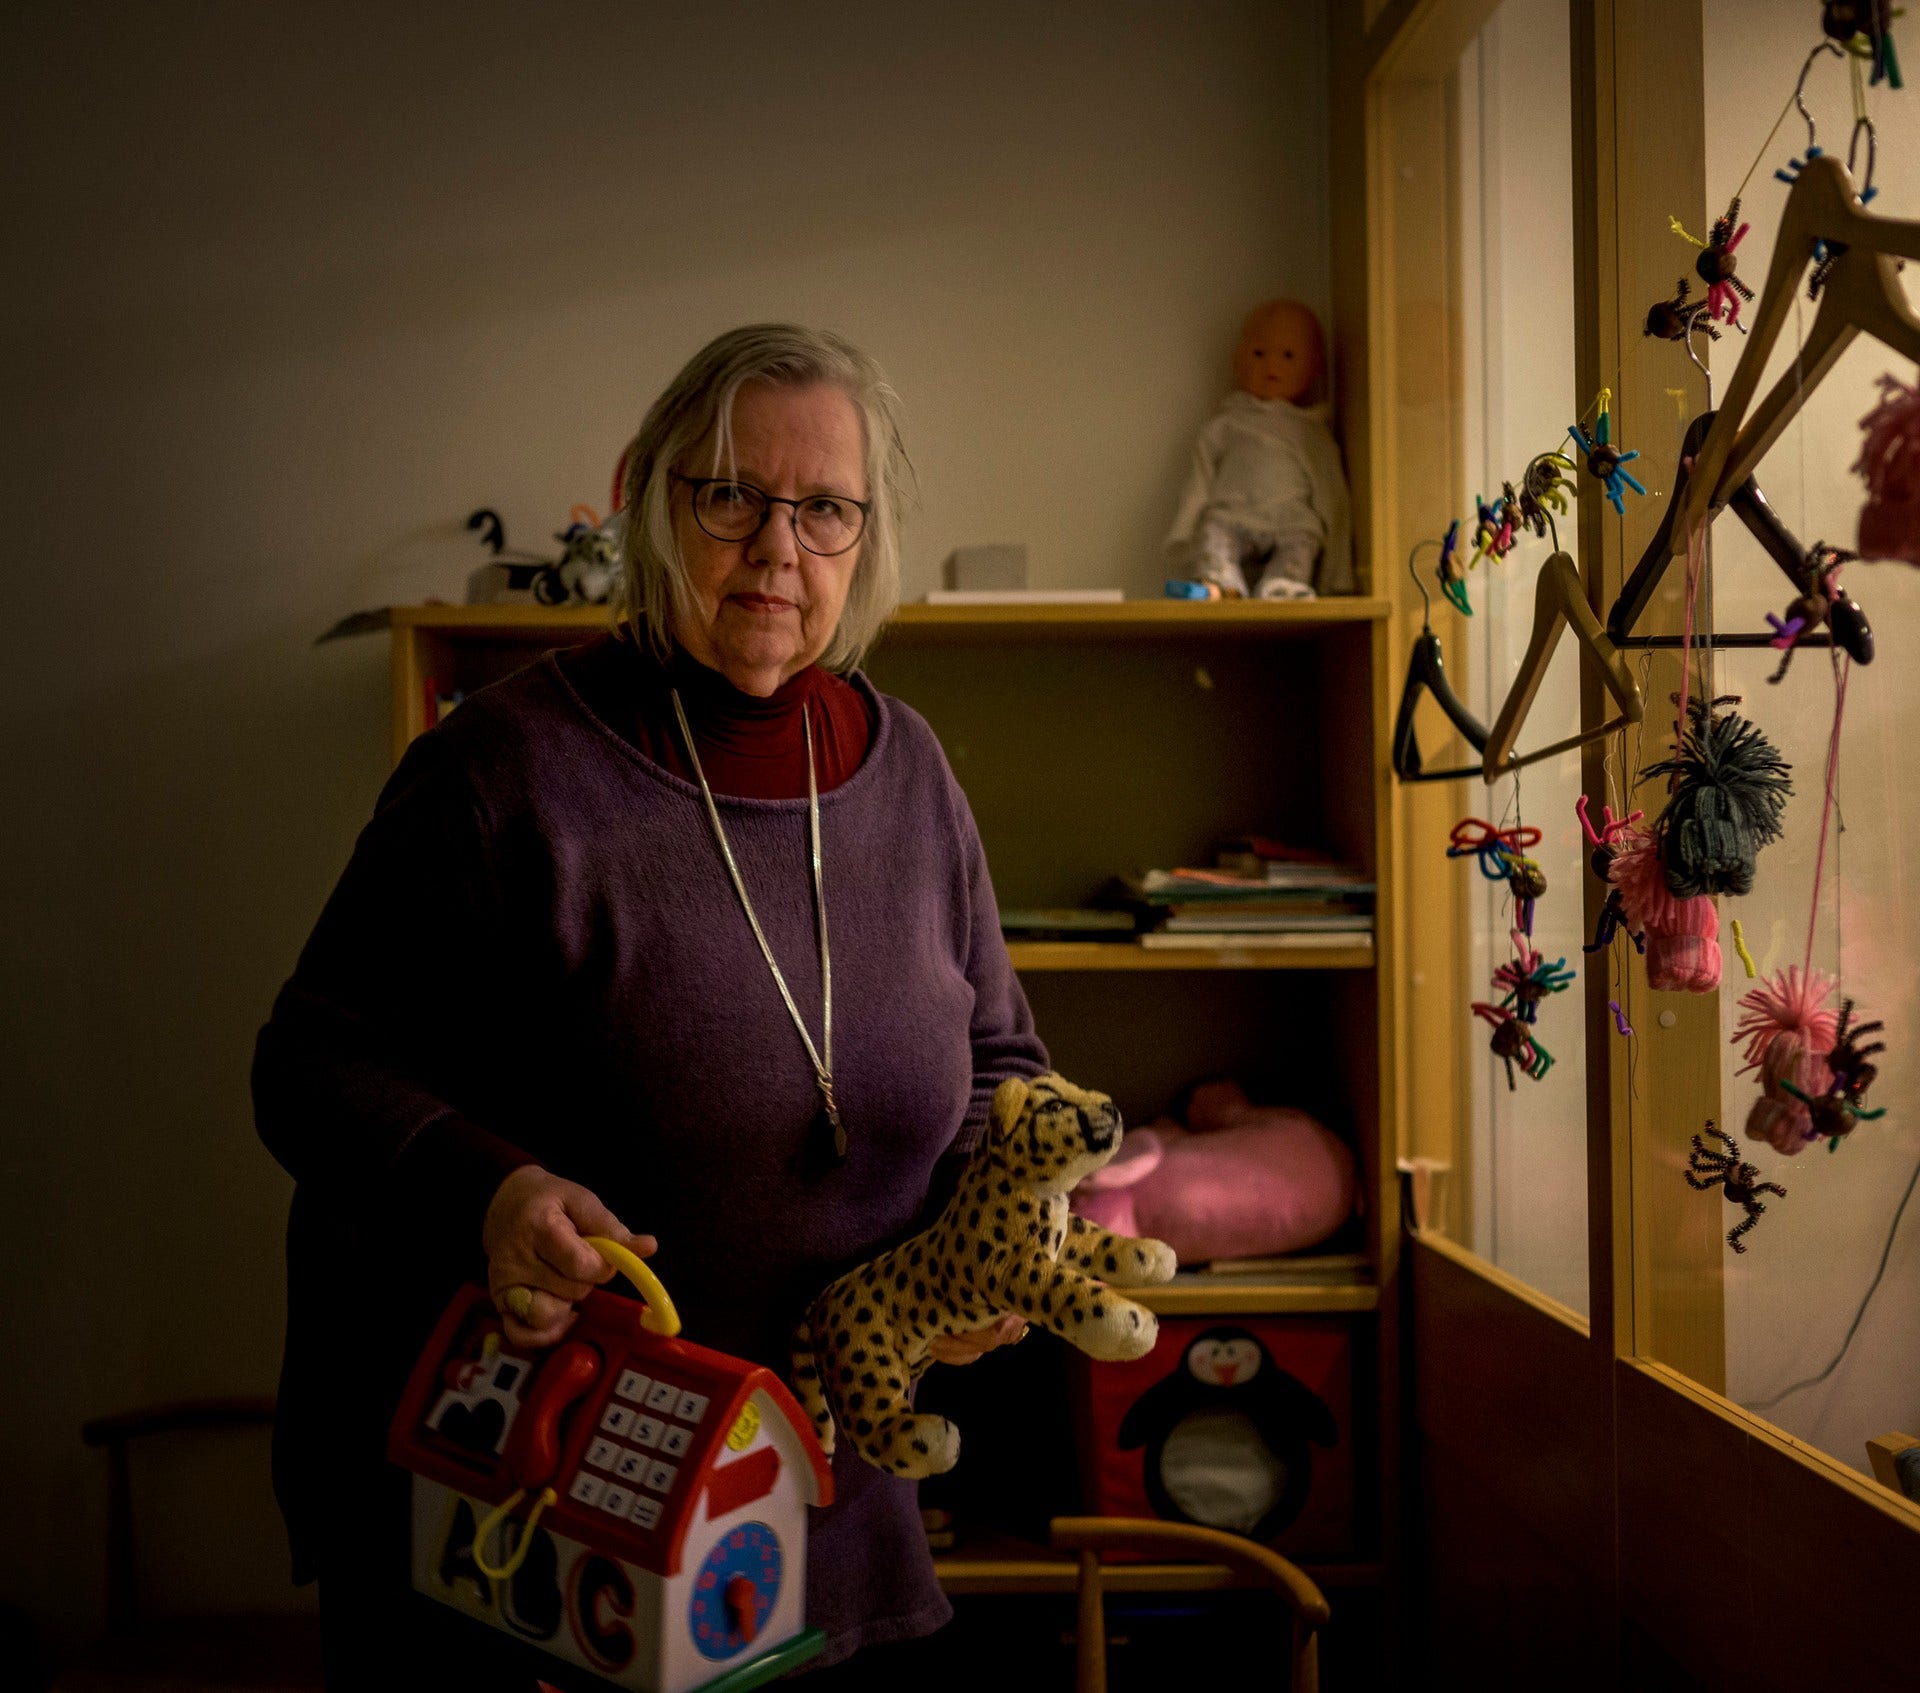 Marie Jansson, 73, was convinced to install a program which made it possible to remotely control her computer. She watched as the fraudsters filled out loan applications in her name in a number of banks and credit institutes.